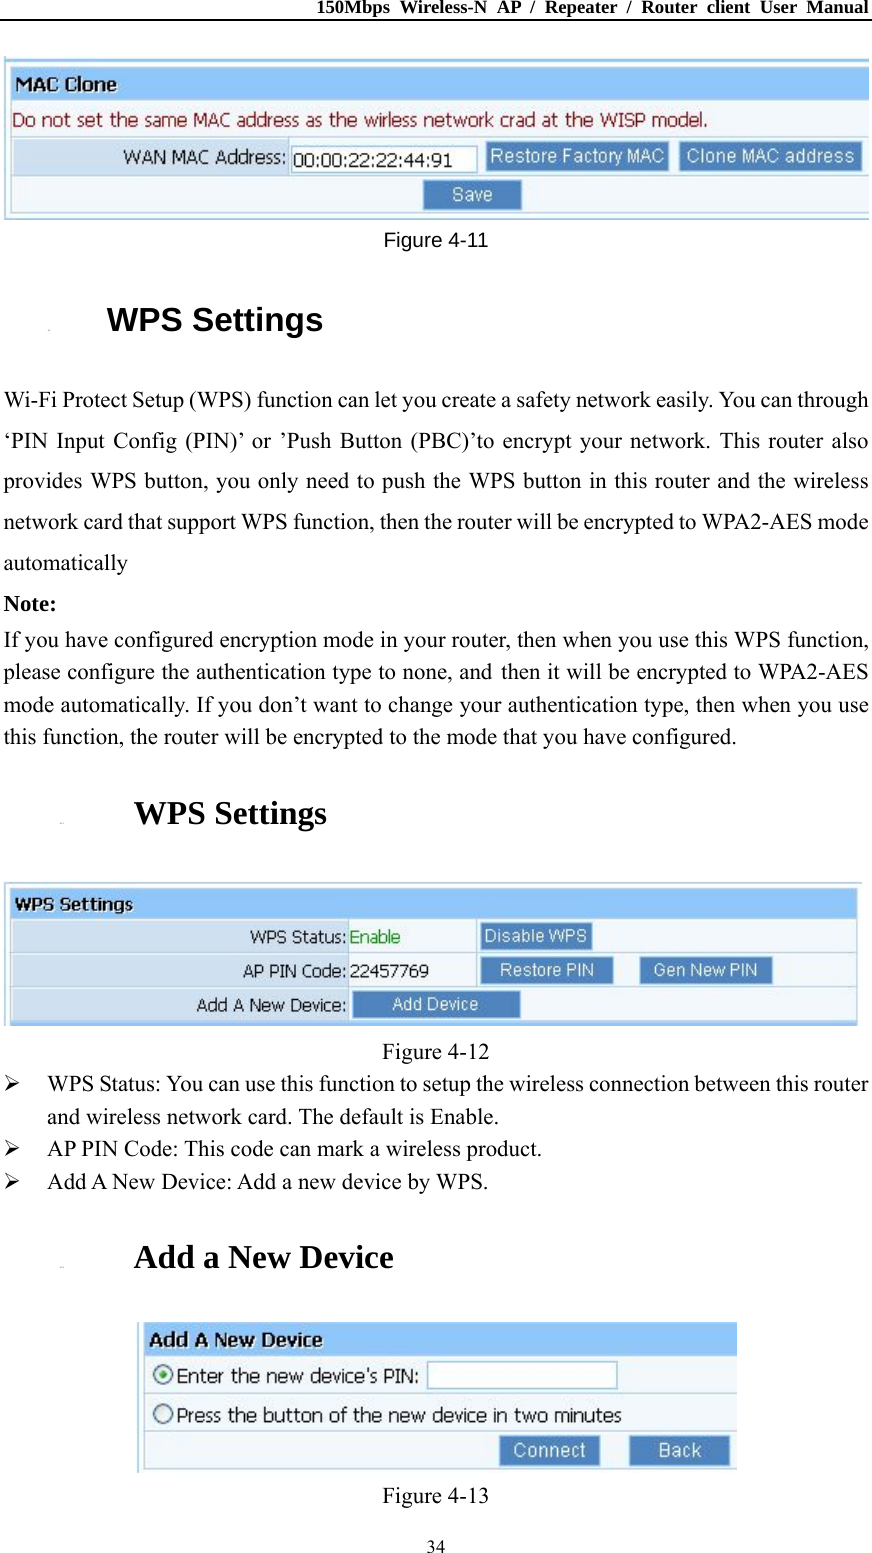 150Mbps Wireless-N AP / Repeater / Router client User Manual  34 Figure 4-11 4.3. WPS Settings Wi-Fi Protect Setup (WPS) function can let you create a safety network easily. You can through ‘PIN Input Config (PIN)’ or ’Push Button (PBC)’to encrypt your network. This router also provides WPS button, you only need to push the WPS button in this router and the wireless network card that support WPS function, then the router will be encrypted to WPA2-AES mode automatically Note: If you have configured encryption mode in your router, then when you use this WPS function, please configure the authentication type to none, and then it will be encrypted to WPA2-AES mode automatically. If you don’t want to change your authentication type, then when you use this function, the router will be encrypted to the mode that you have configured. 4.3.1. WPS Settings  Figure 4-12  WPS Status: You can use this function to setup the wireless connection between this router and wireless network card. The default is Enable.  AP PIN Code: This code can mark a wireless product.  Add A New Device: Add a new device by WPS. 4.3.2. Add a New Device  Figure 4-13 